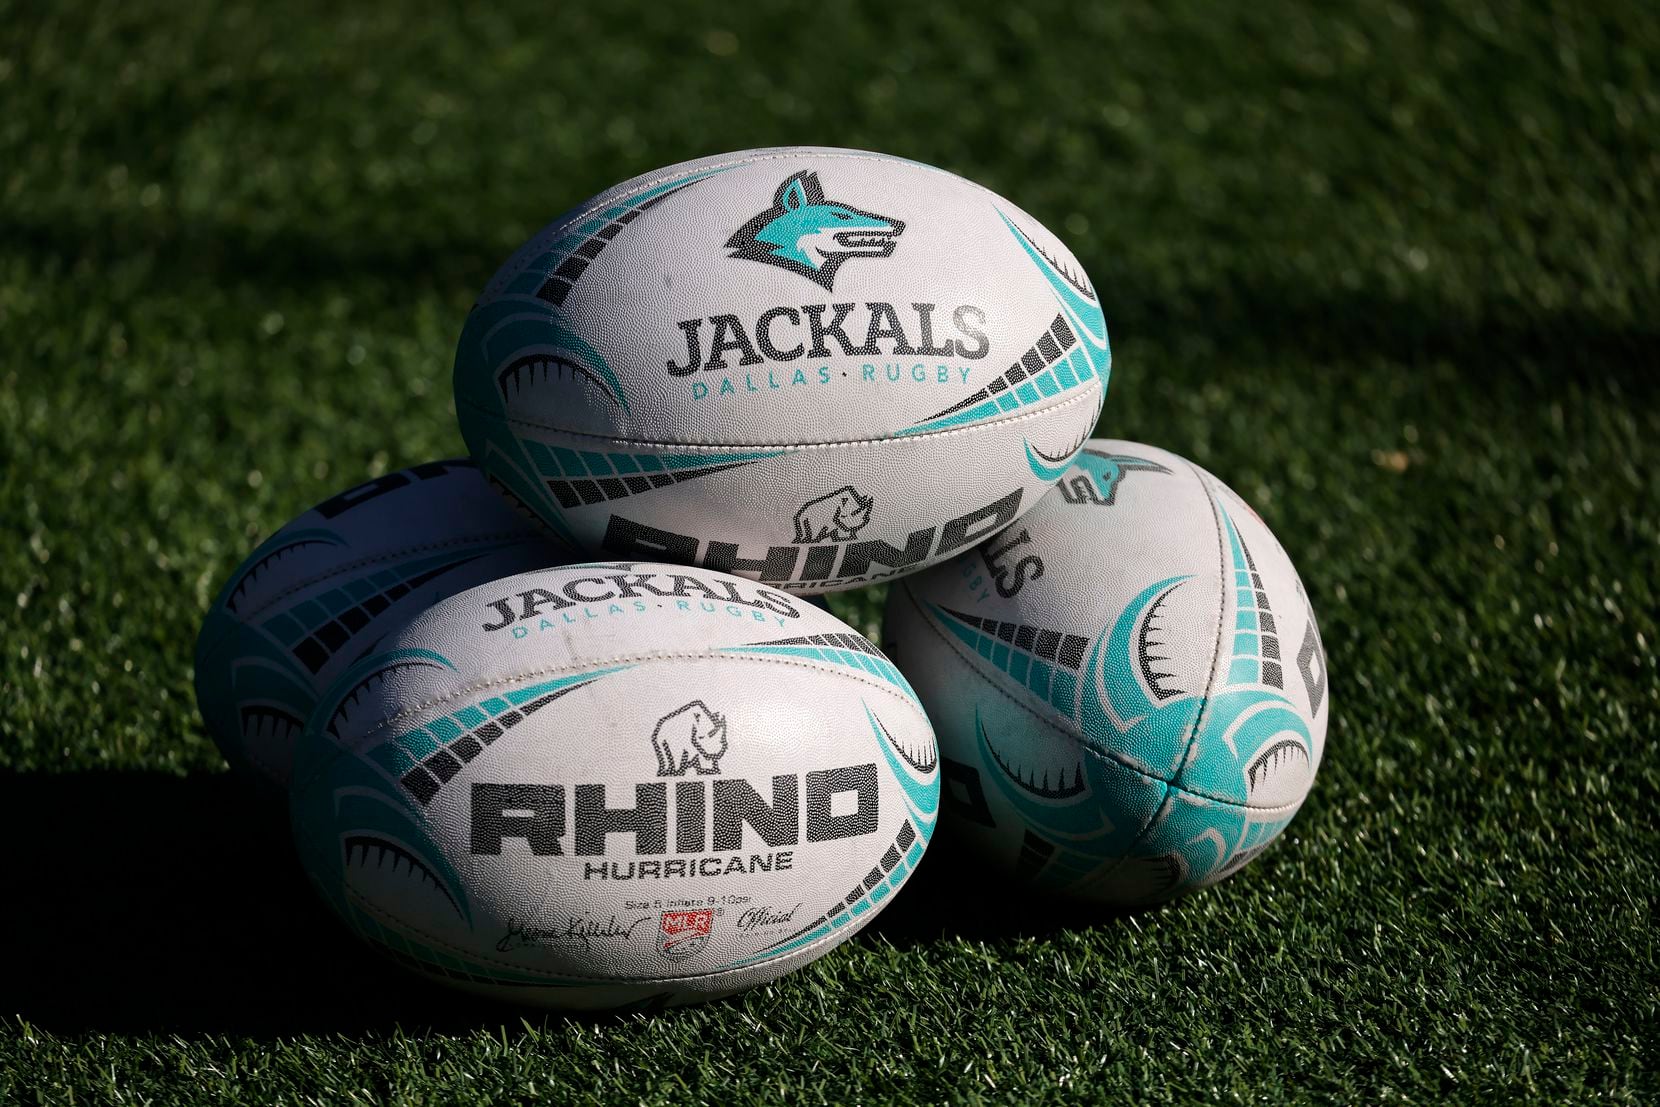 A stack of Dallas Jackals rugby balls is pictured during practice at Choctaw Stadium in Arlington.